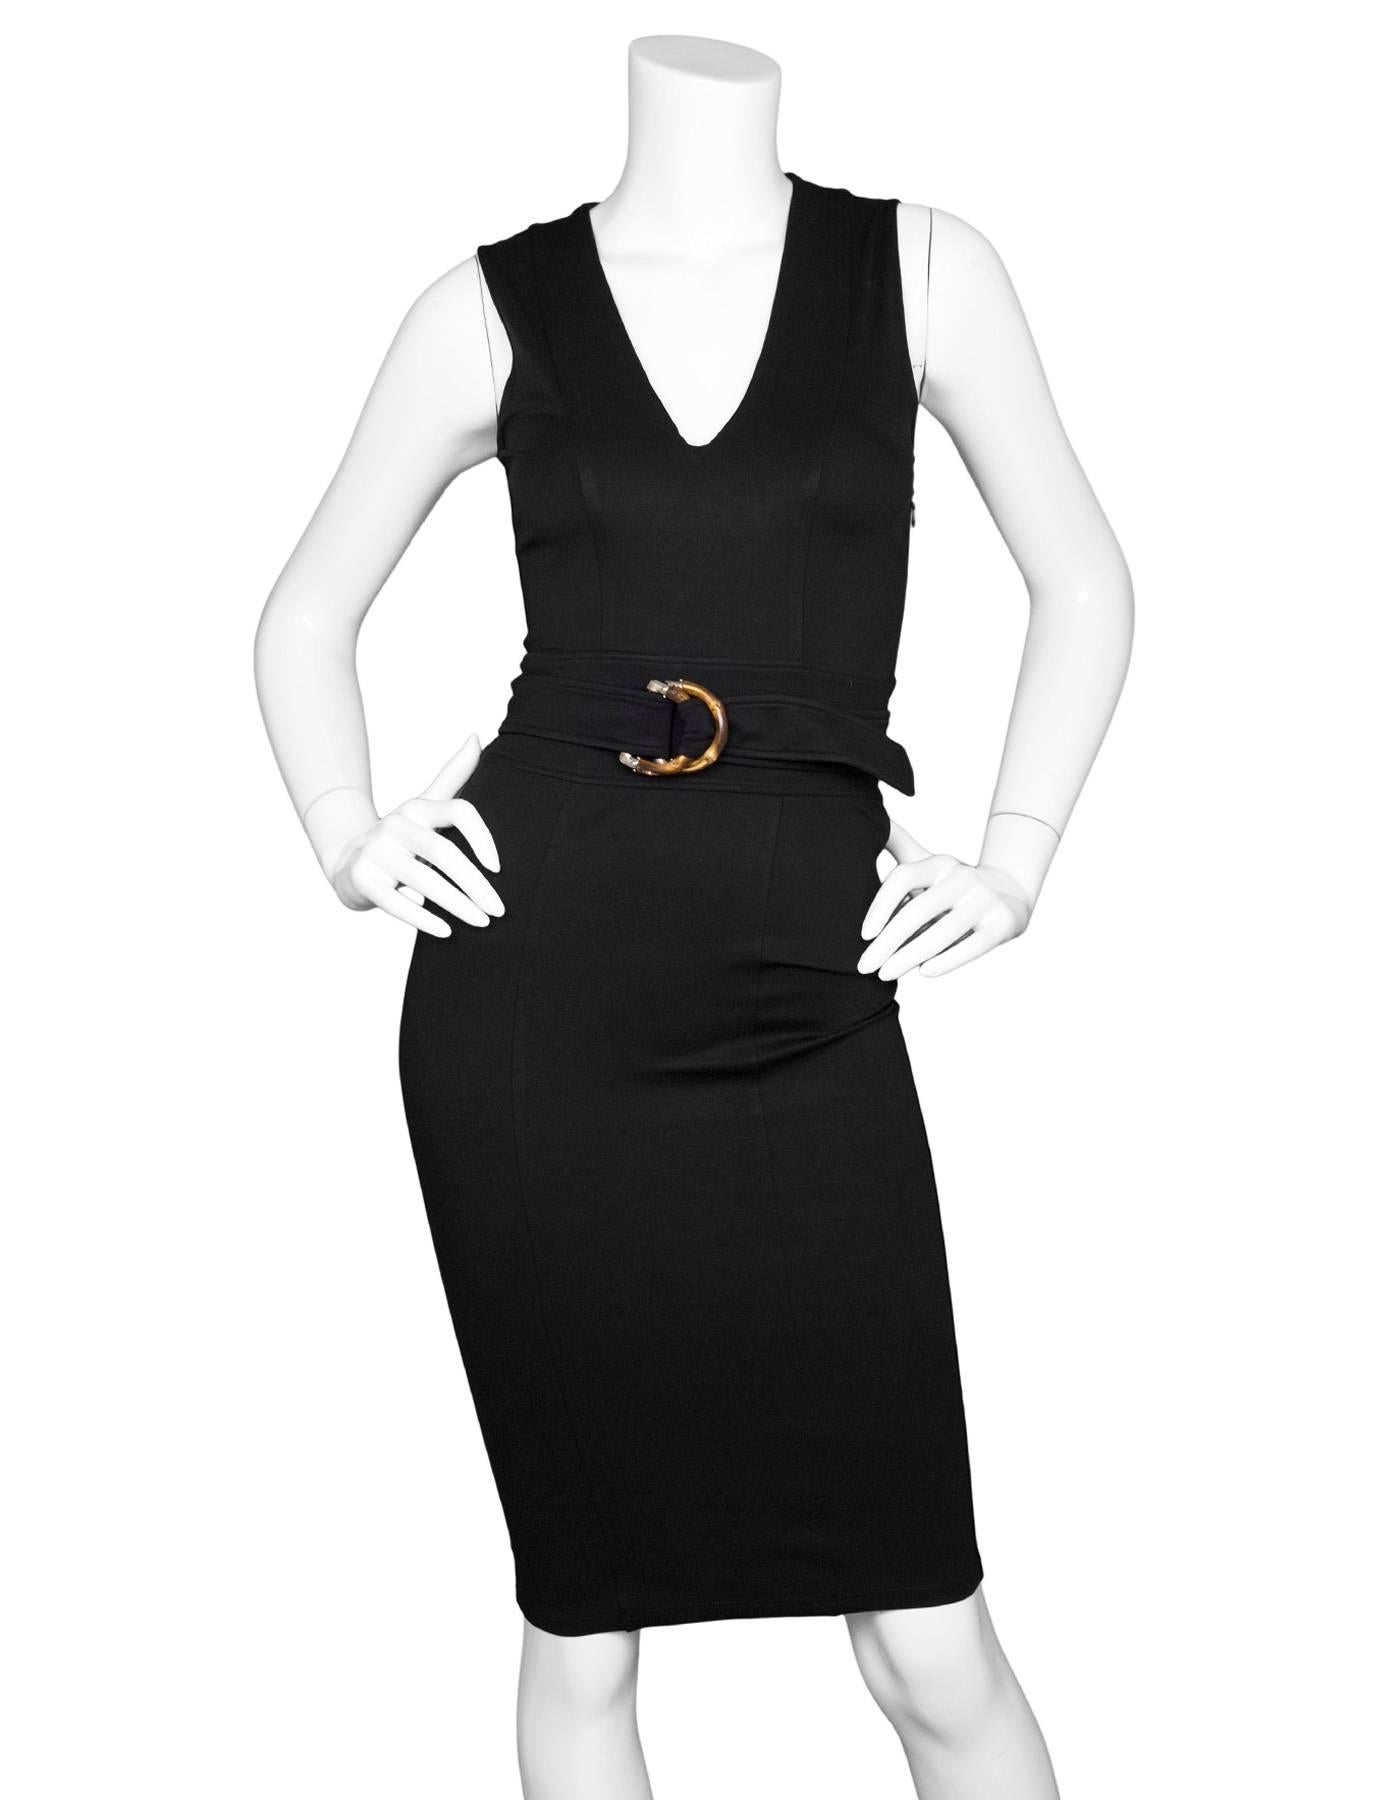 Gucci Black Sleeveless V-Neck Dress With Bamboo Belt Sz XS

Made In: Italy
Color: Black
Composition: Illedgable/faded, feels like nylon blend
Lining: None
Closure/Opening: Side zip closure
Overall Condition: Very good pre-owned condition with the